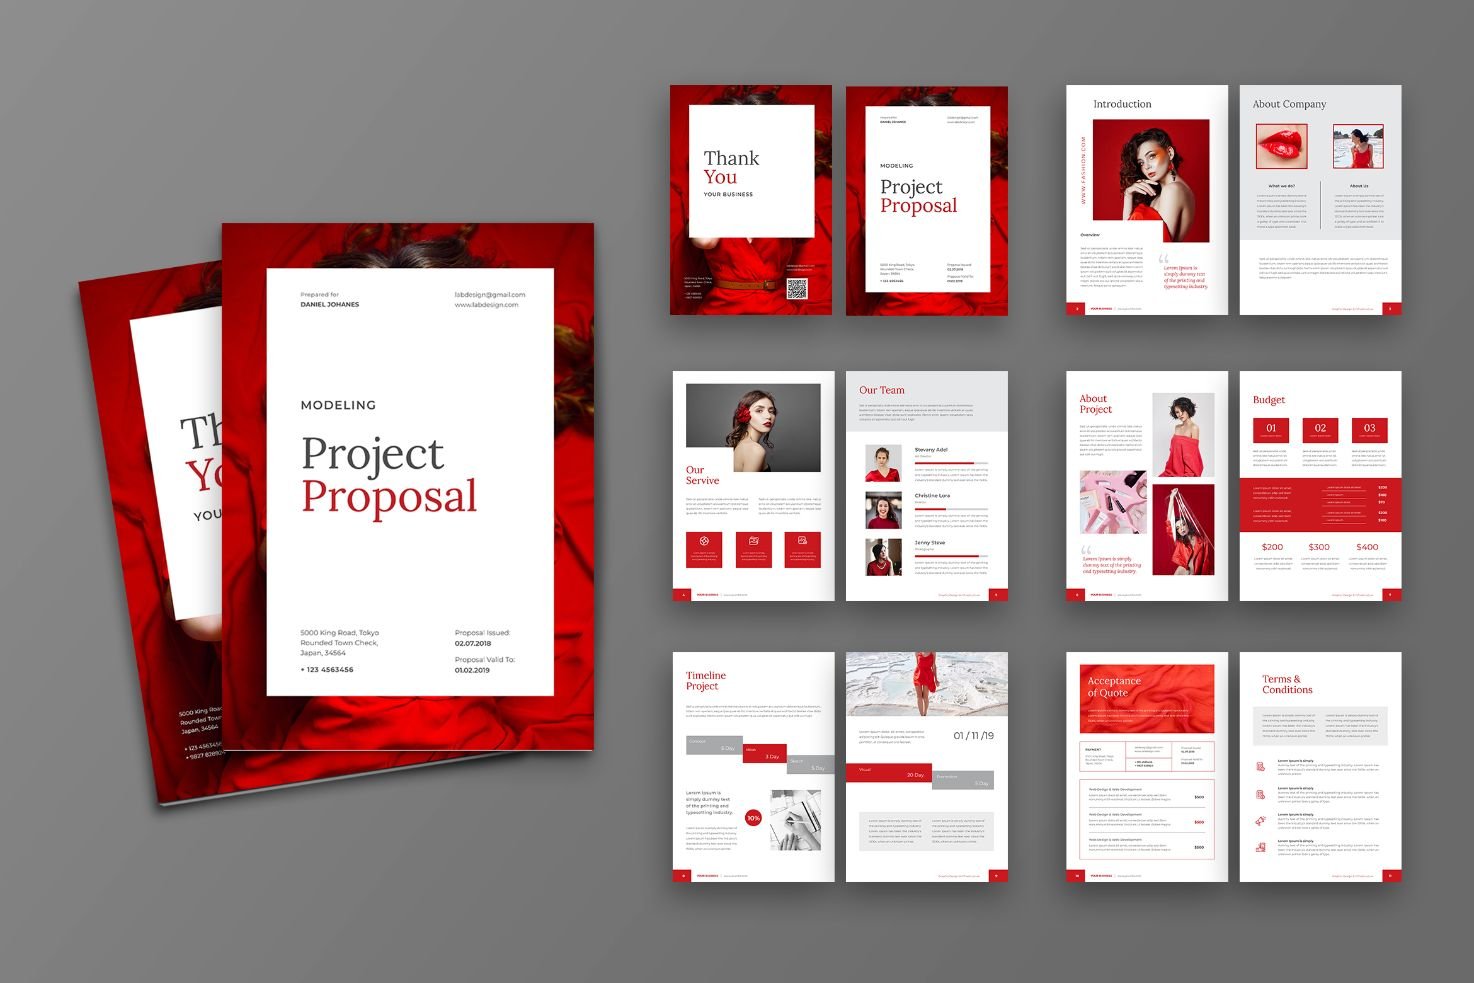 Proposal Modeling Project - Red and White Theme With Transparent Overlays